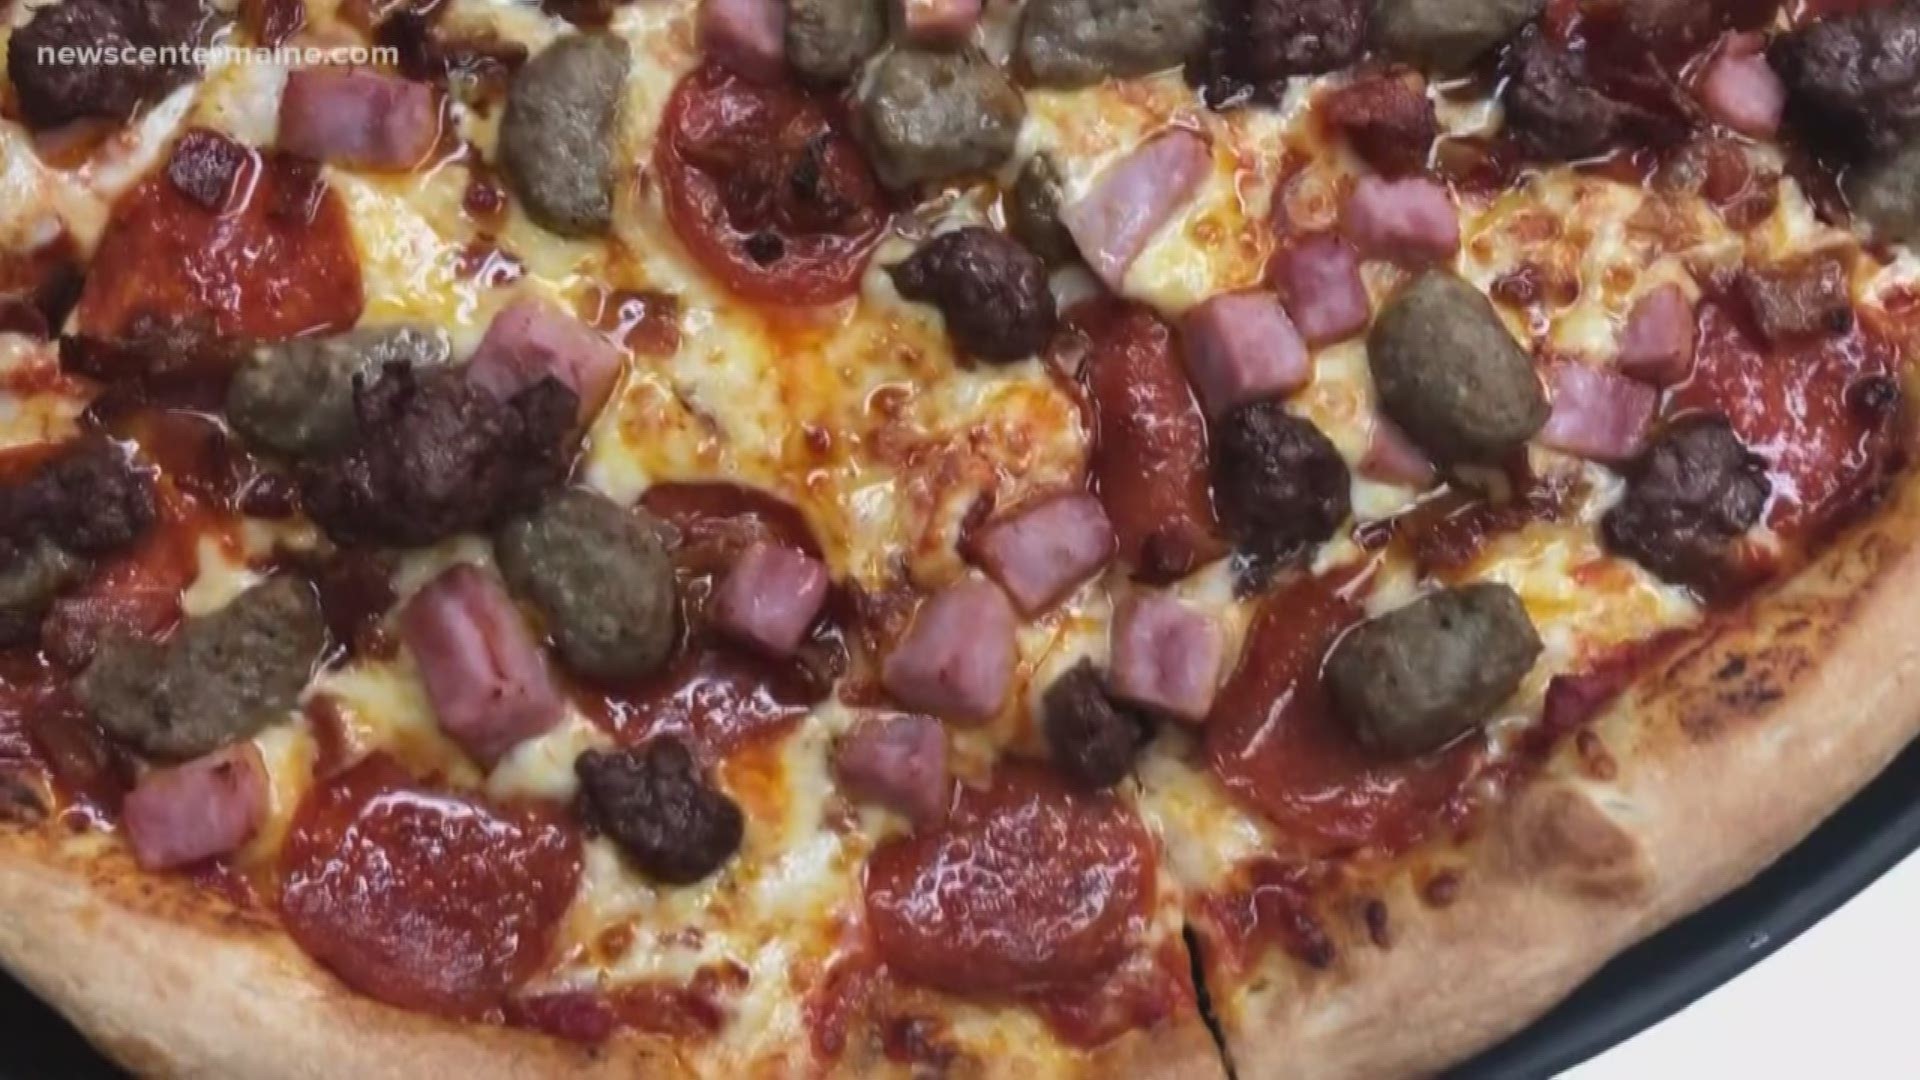 "The Penalty Box" in Damariscotta serves up a pizza called the "Big Bad Bruin"